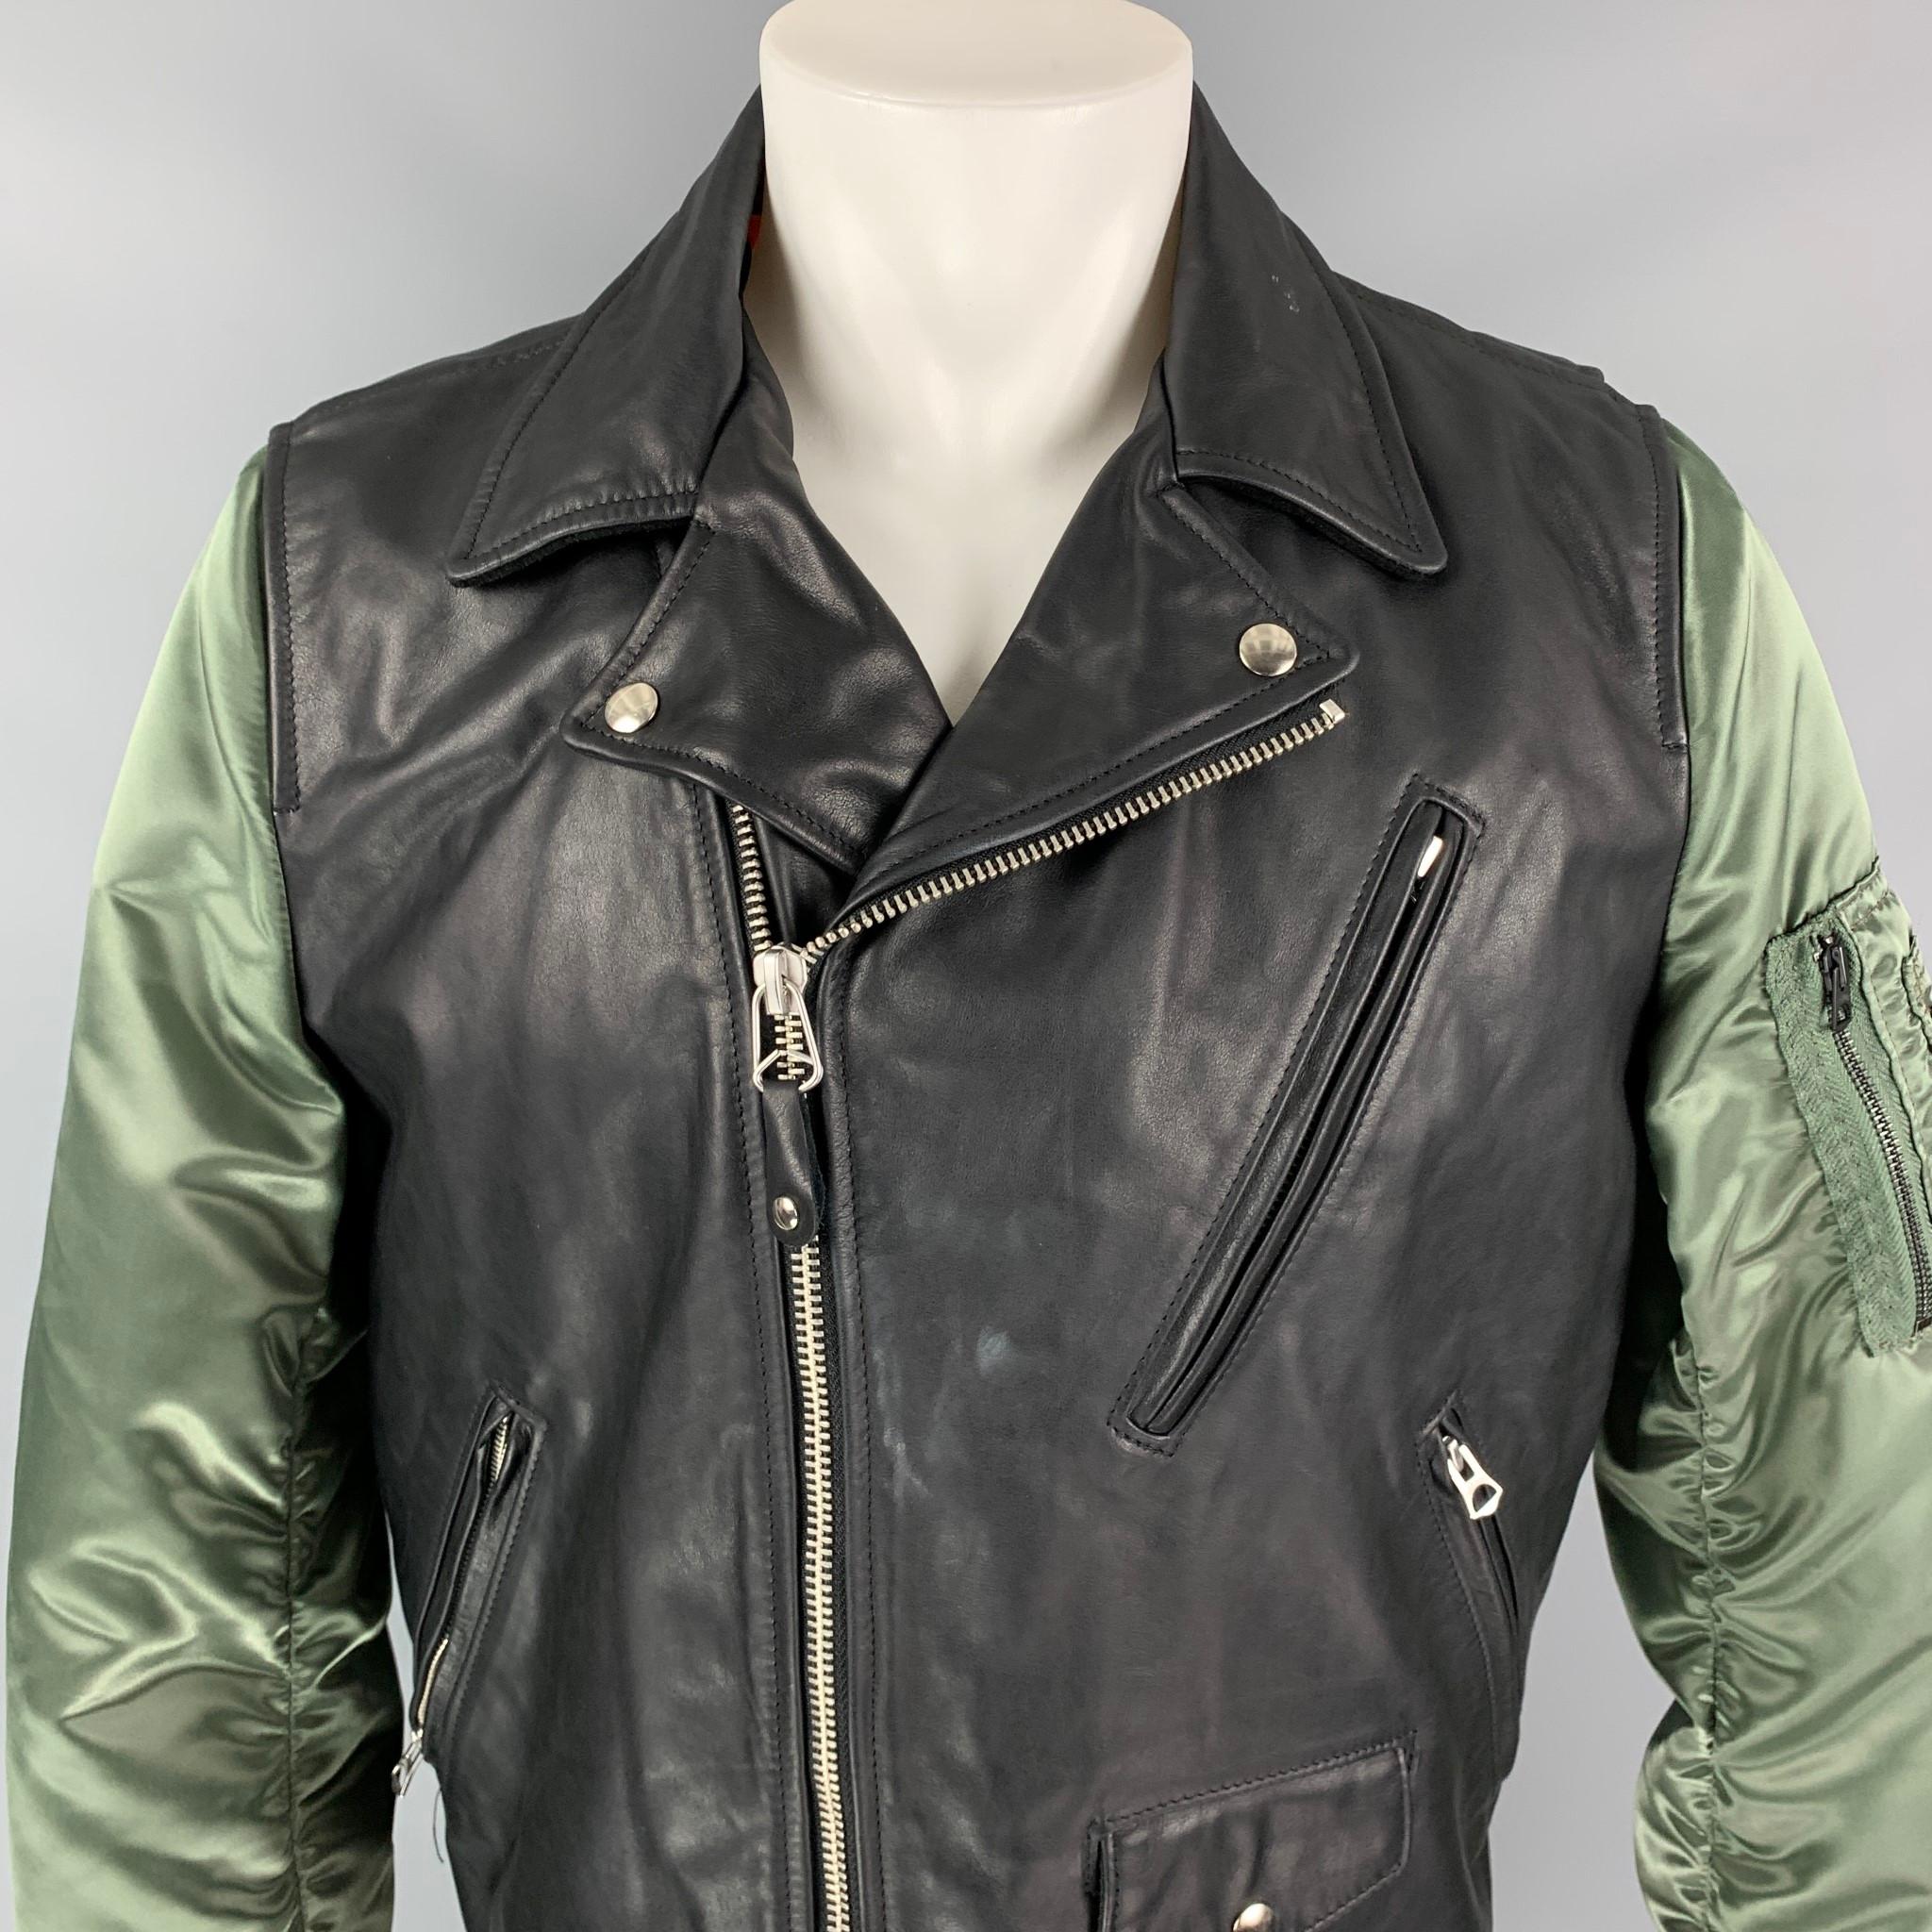 RAG & BONE x SCHOTT PERFECTO jacket comes in a back leather with a full orange liner featuring olive green nylon sleeves, biker style, front pockets, and a zip up closure. Made in USA.

Excellent Pre-Owned Condition. Fabric tag removed.
Marked: